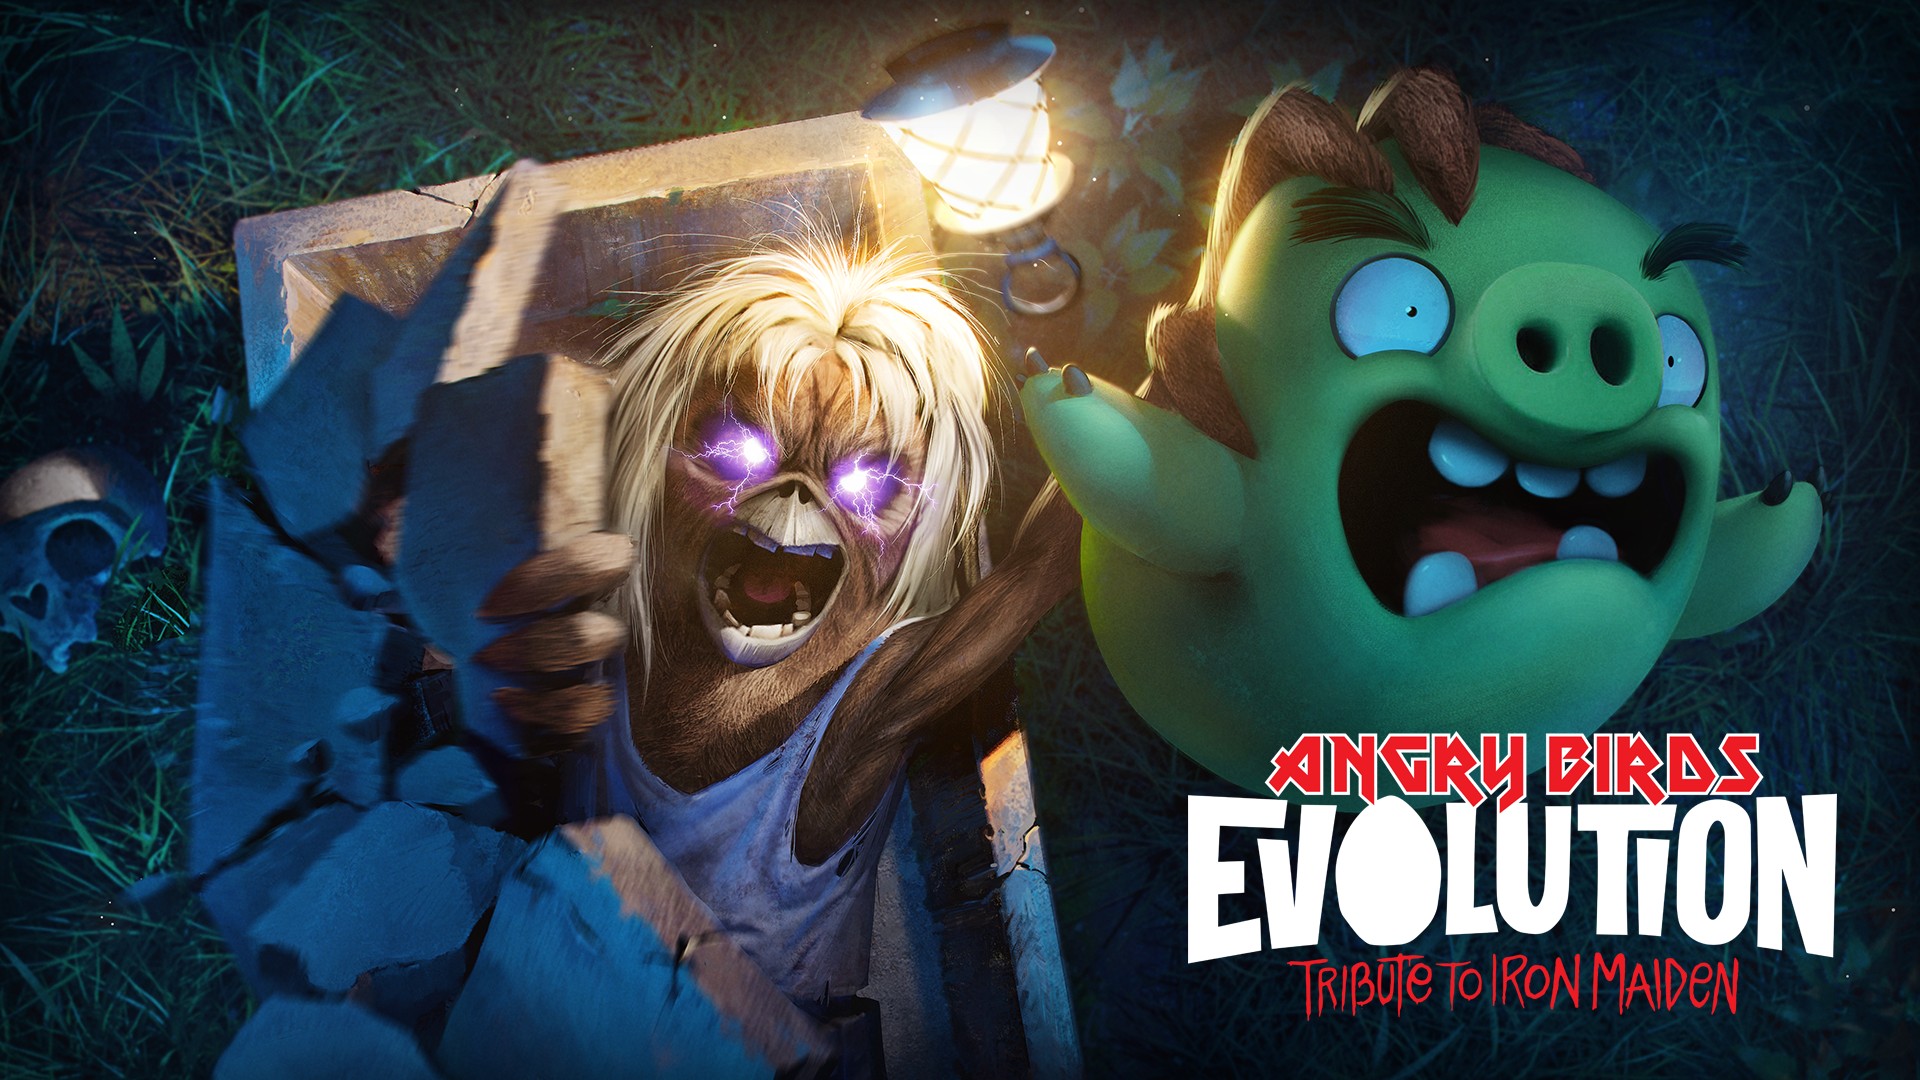 'Angry Birds Evolution' and 'Iron Maiden' Make for a Great Halloween Mashup